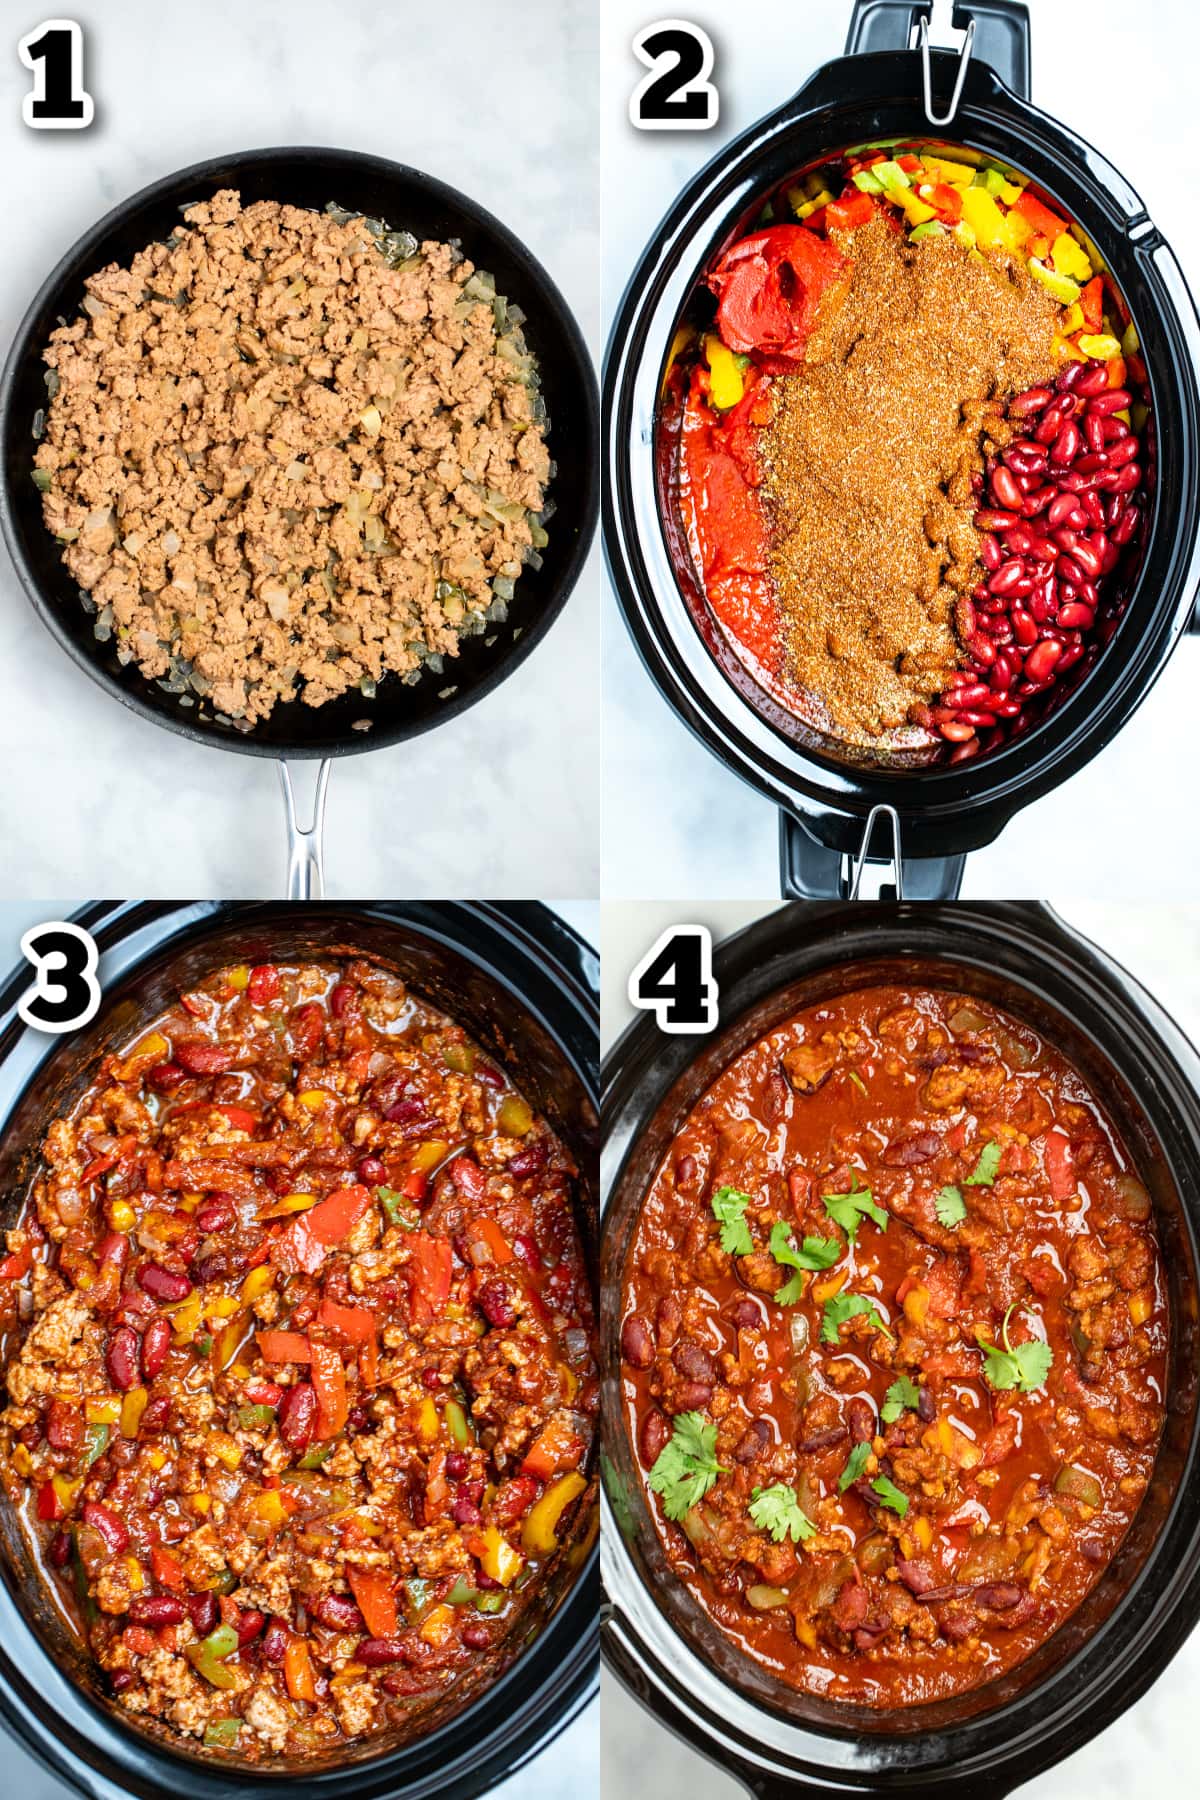 Step by step photos for how to make crockpot turkey chili.